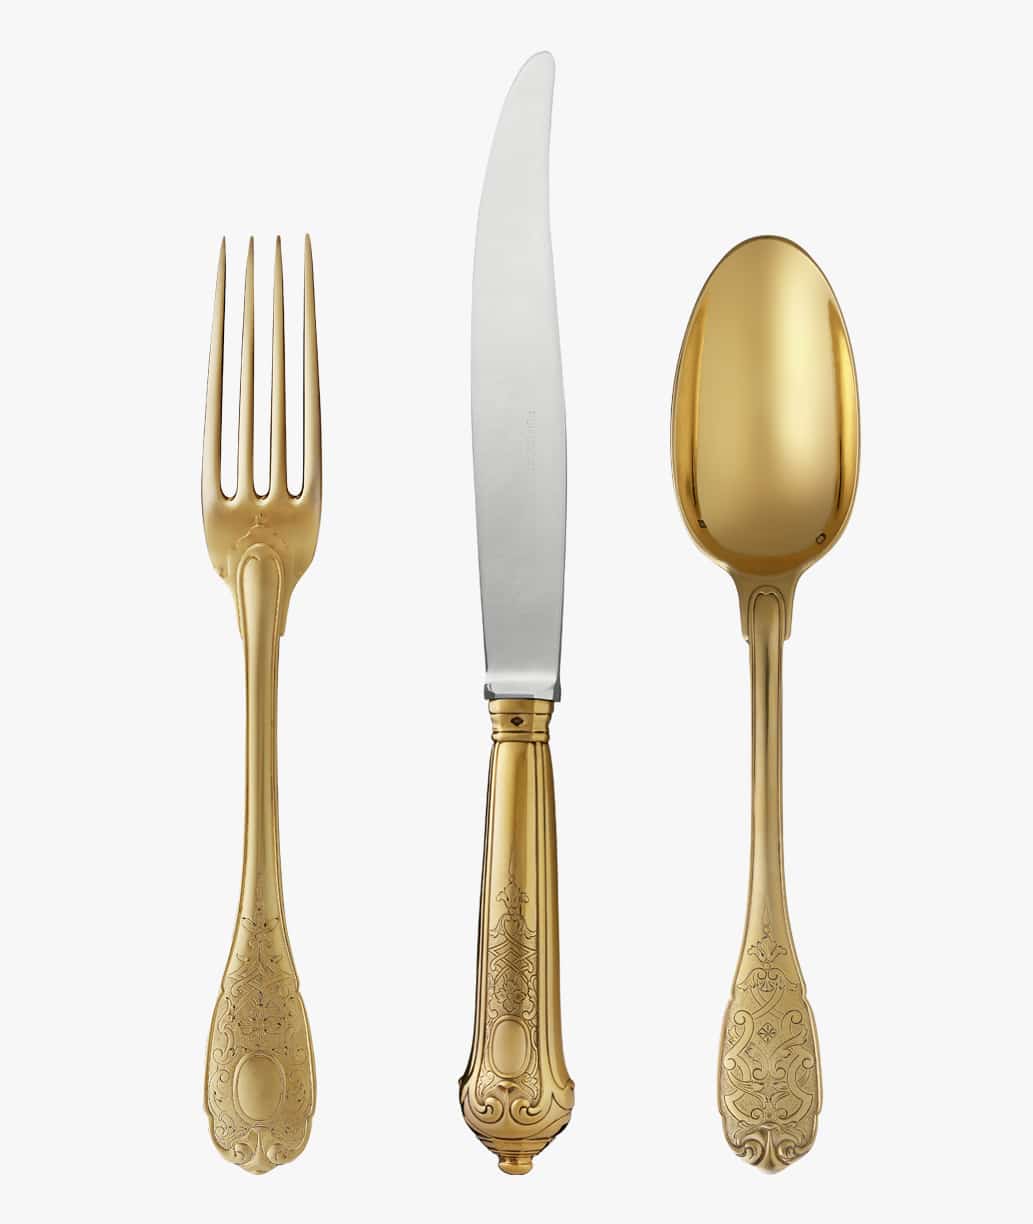 Pieces of cutlery from Elysée collection in sterling silver and a god gilt finish